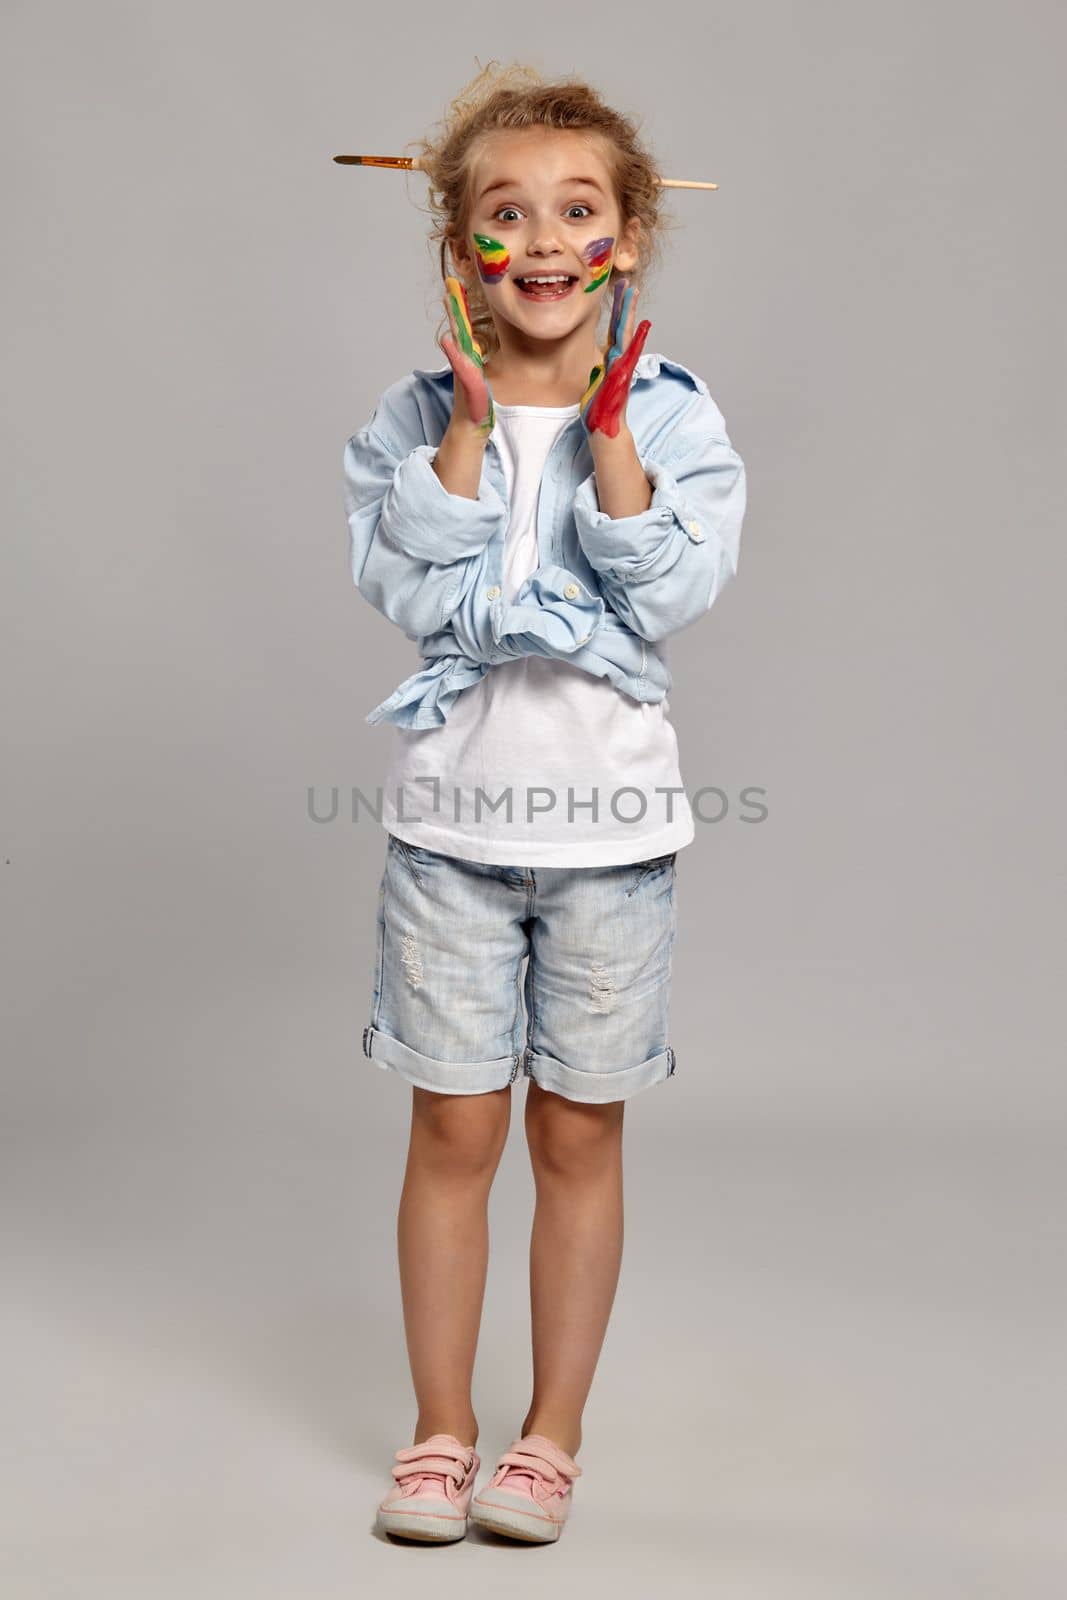 Cheerful child having a brush in her chic curly blond hair, wearing in a blue shirt and white t-shirt. She is posing with a painted hands and cheeks and looking wondered, on a gray background.